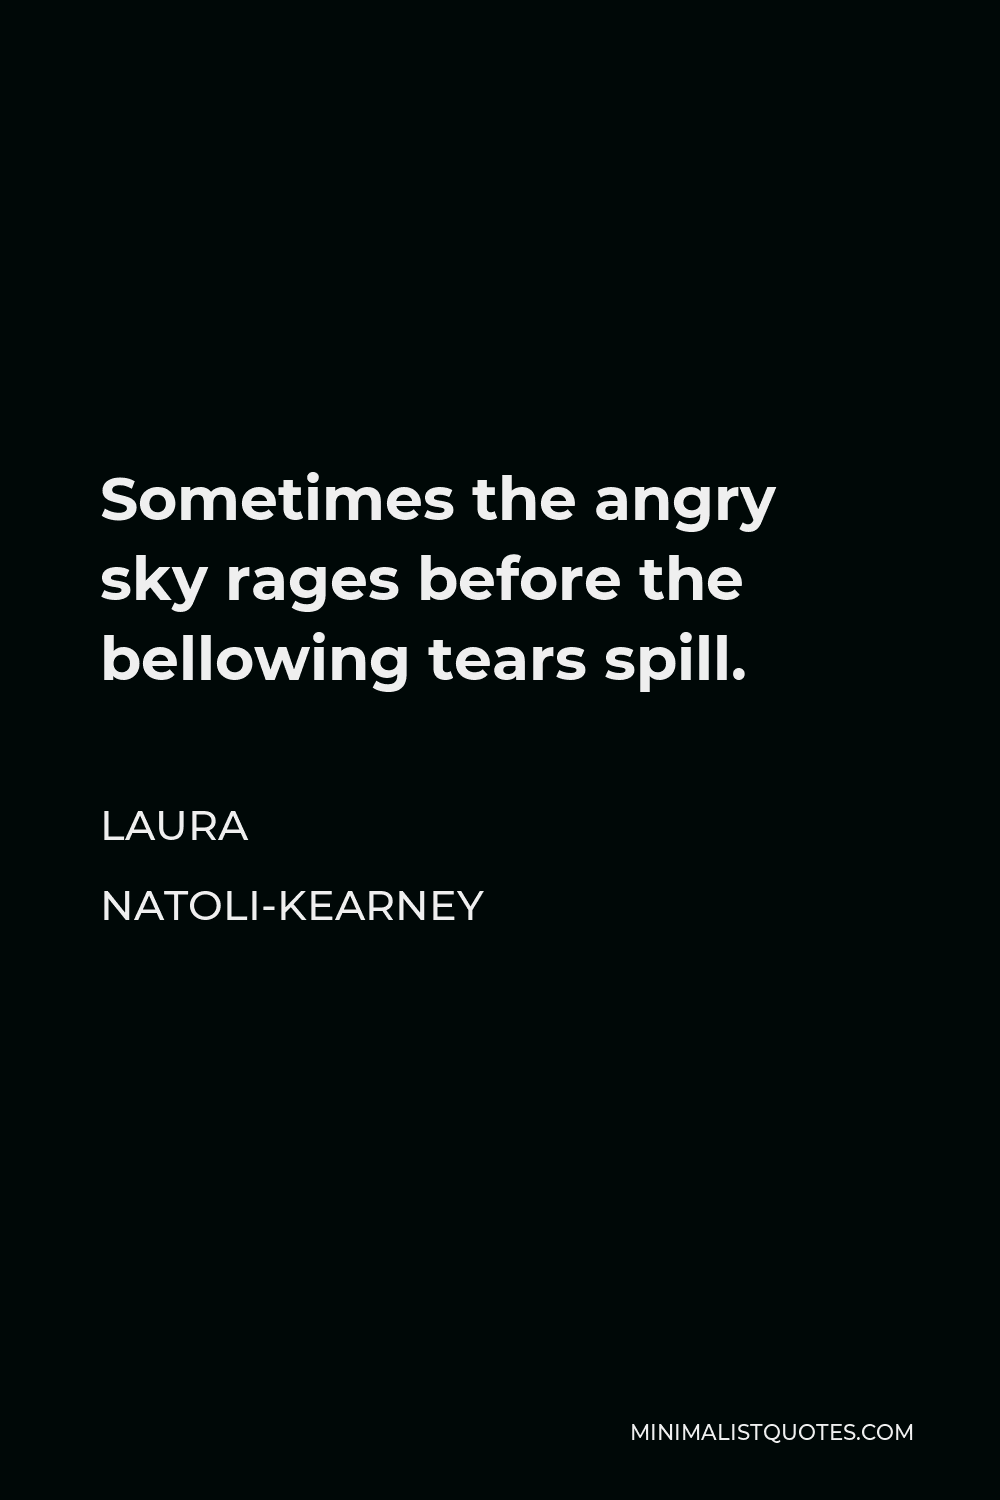 Laura Natoli-Kearney Quote: Sometimes the angry sky rages before ...